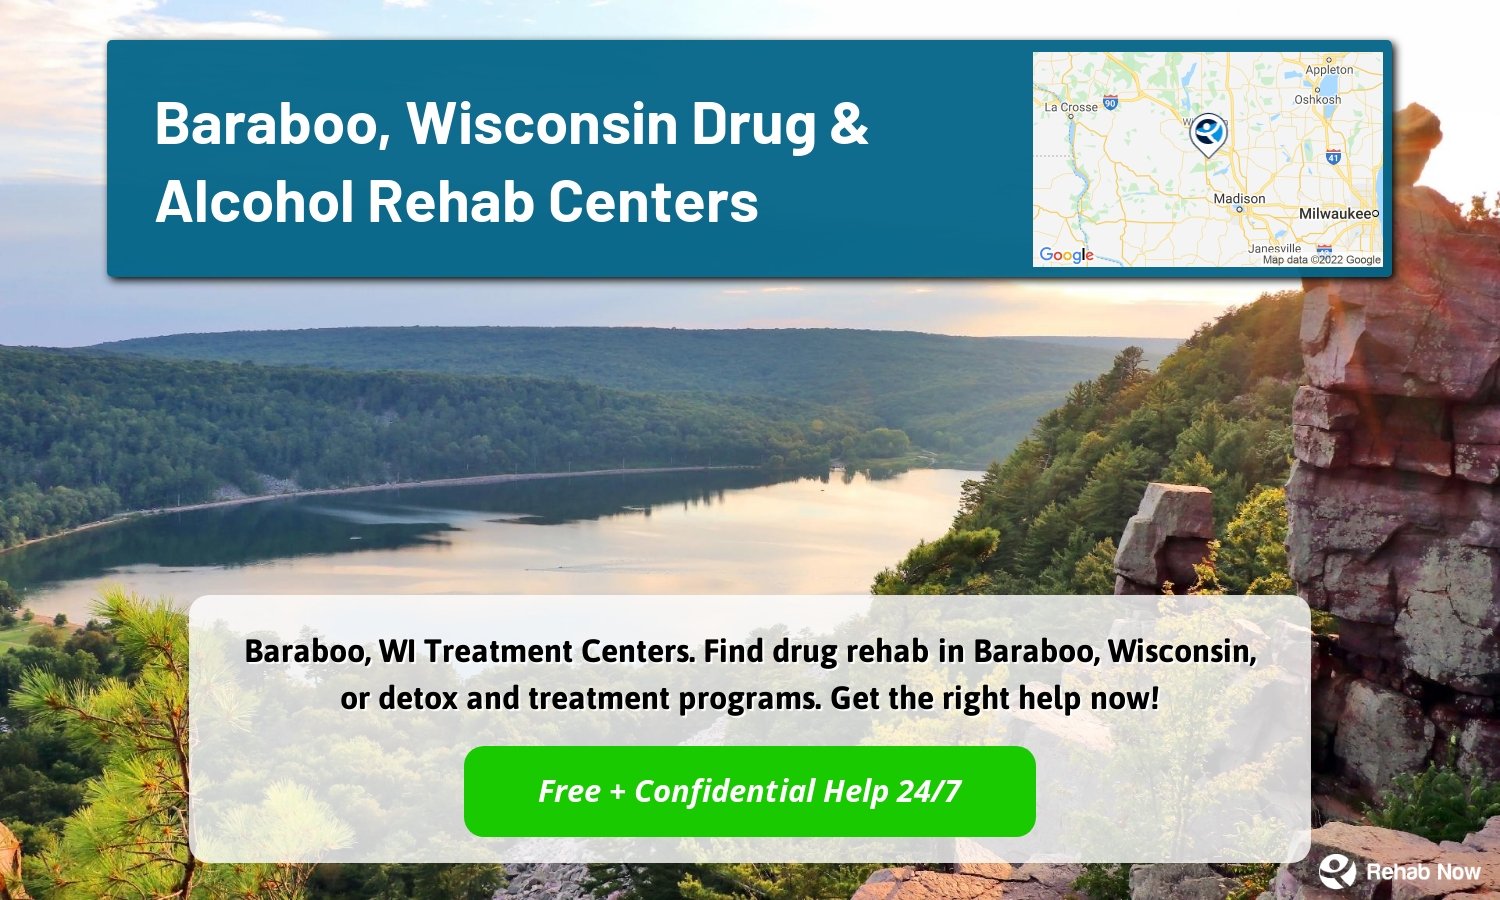 Baraboo, WI Treatment Centers. Find drug rehab in Baraboo, Wisconsin, or detox and treatment programs. Get the right help now!